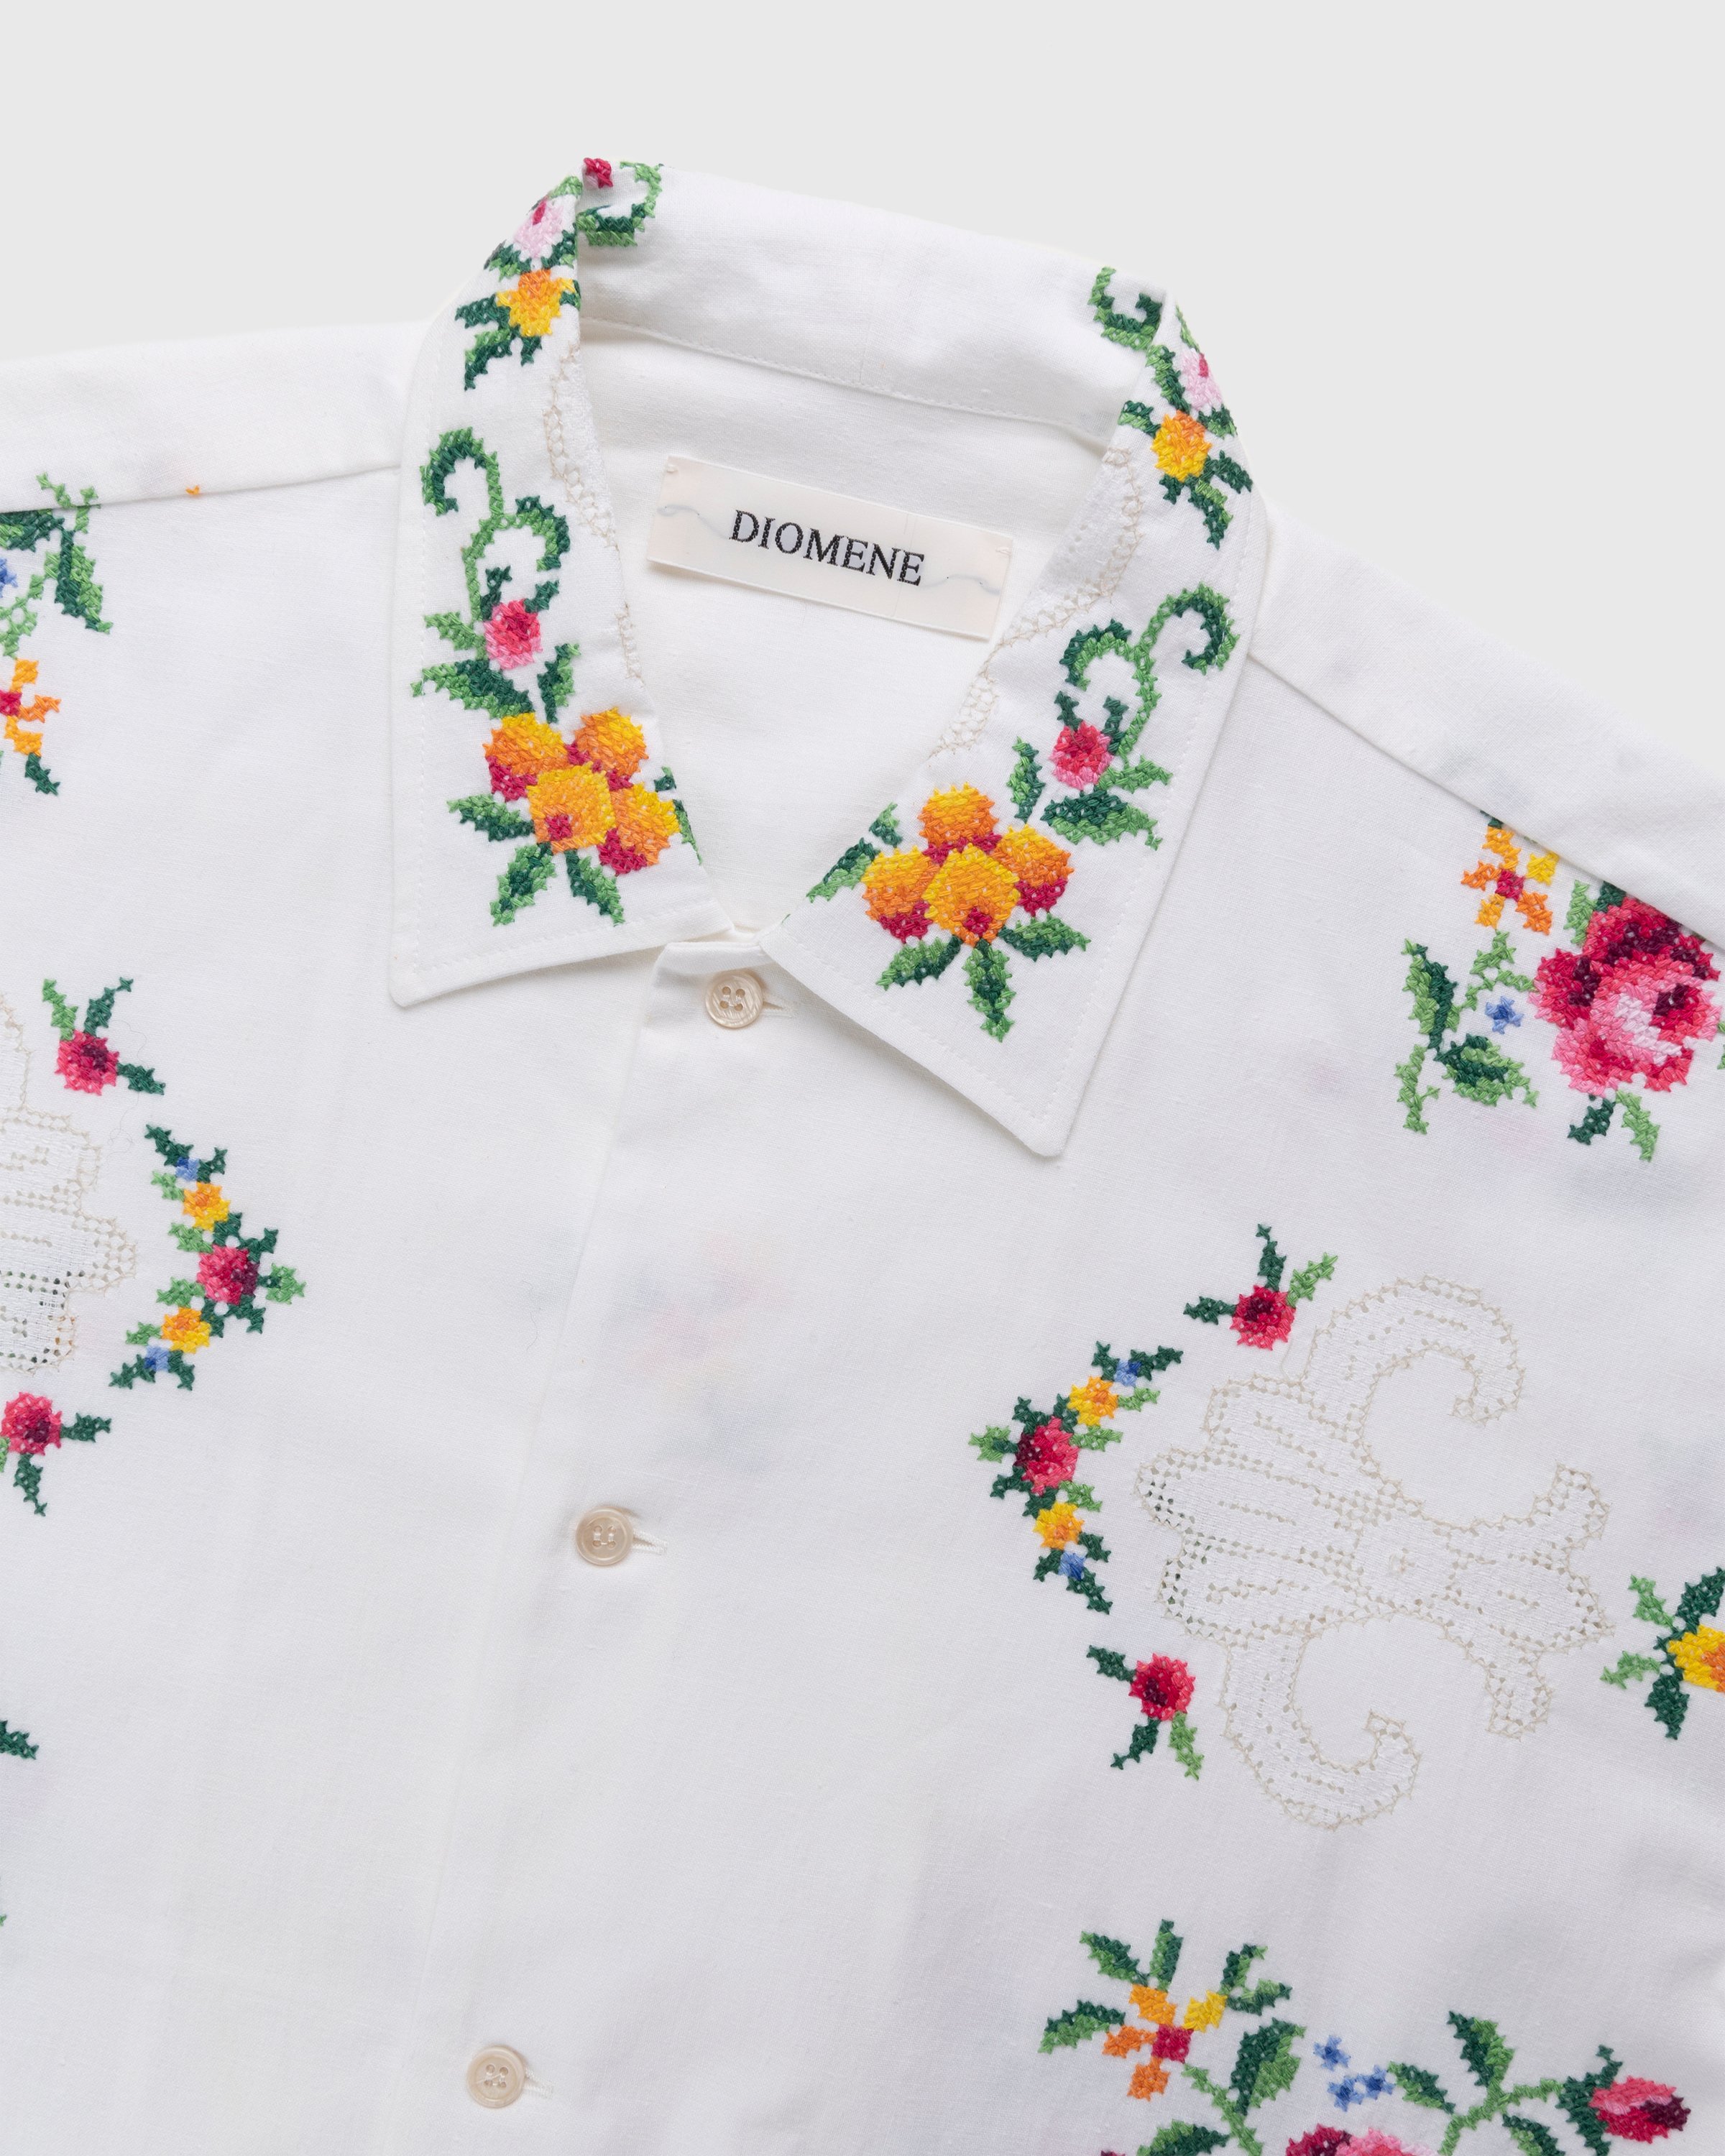 Diomene by Damir Doma - Embroidered Vacation Shirt White/Green - Clothing - White - Image 6